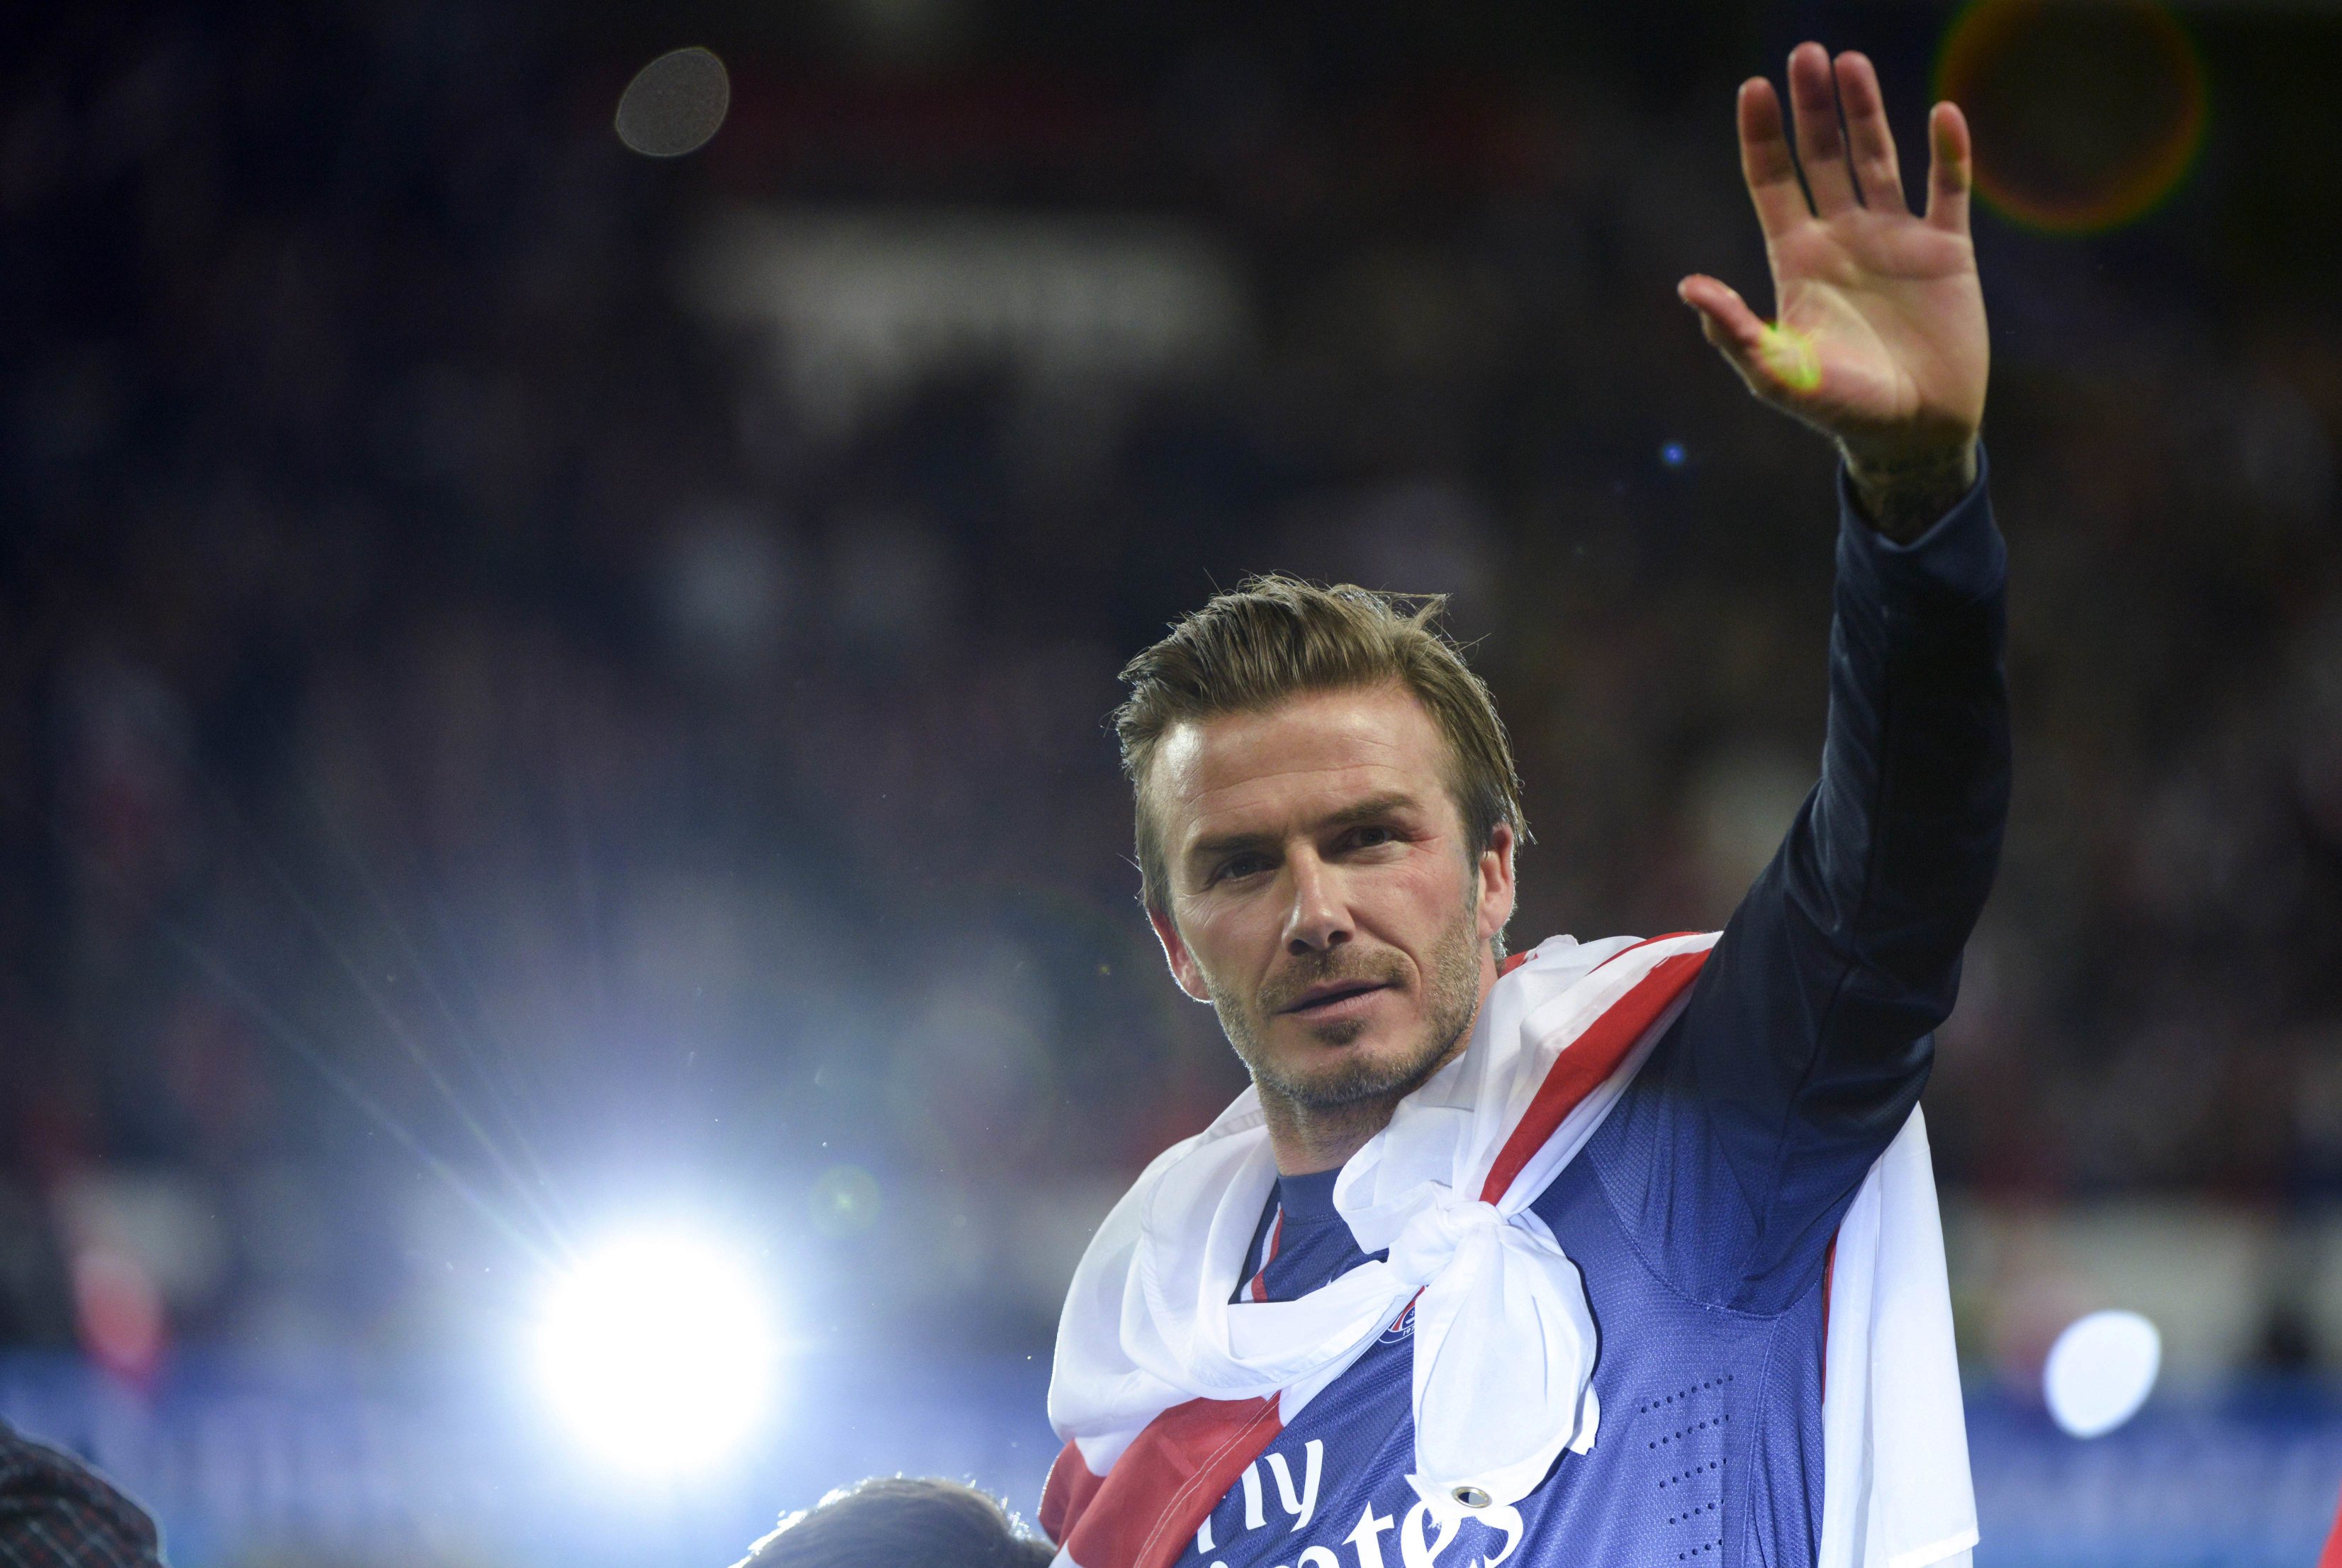 David Beckham waves after his final home appearance for Ligue 1 champions Paris Saint-Germain on Saturday before heading into retirement. Photo: AFP